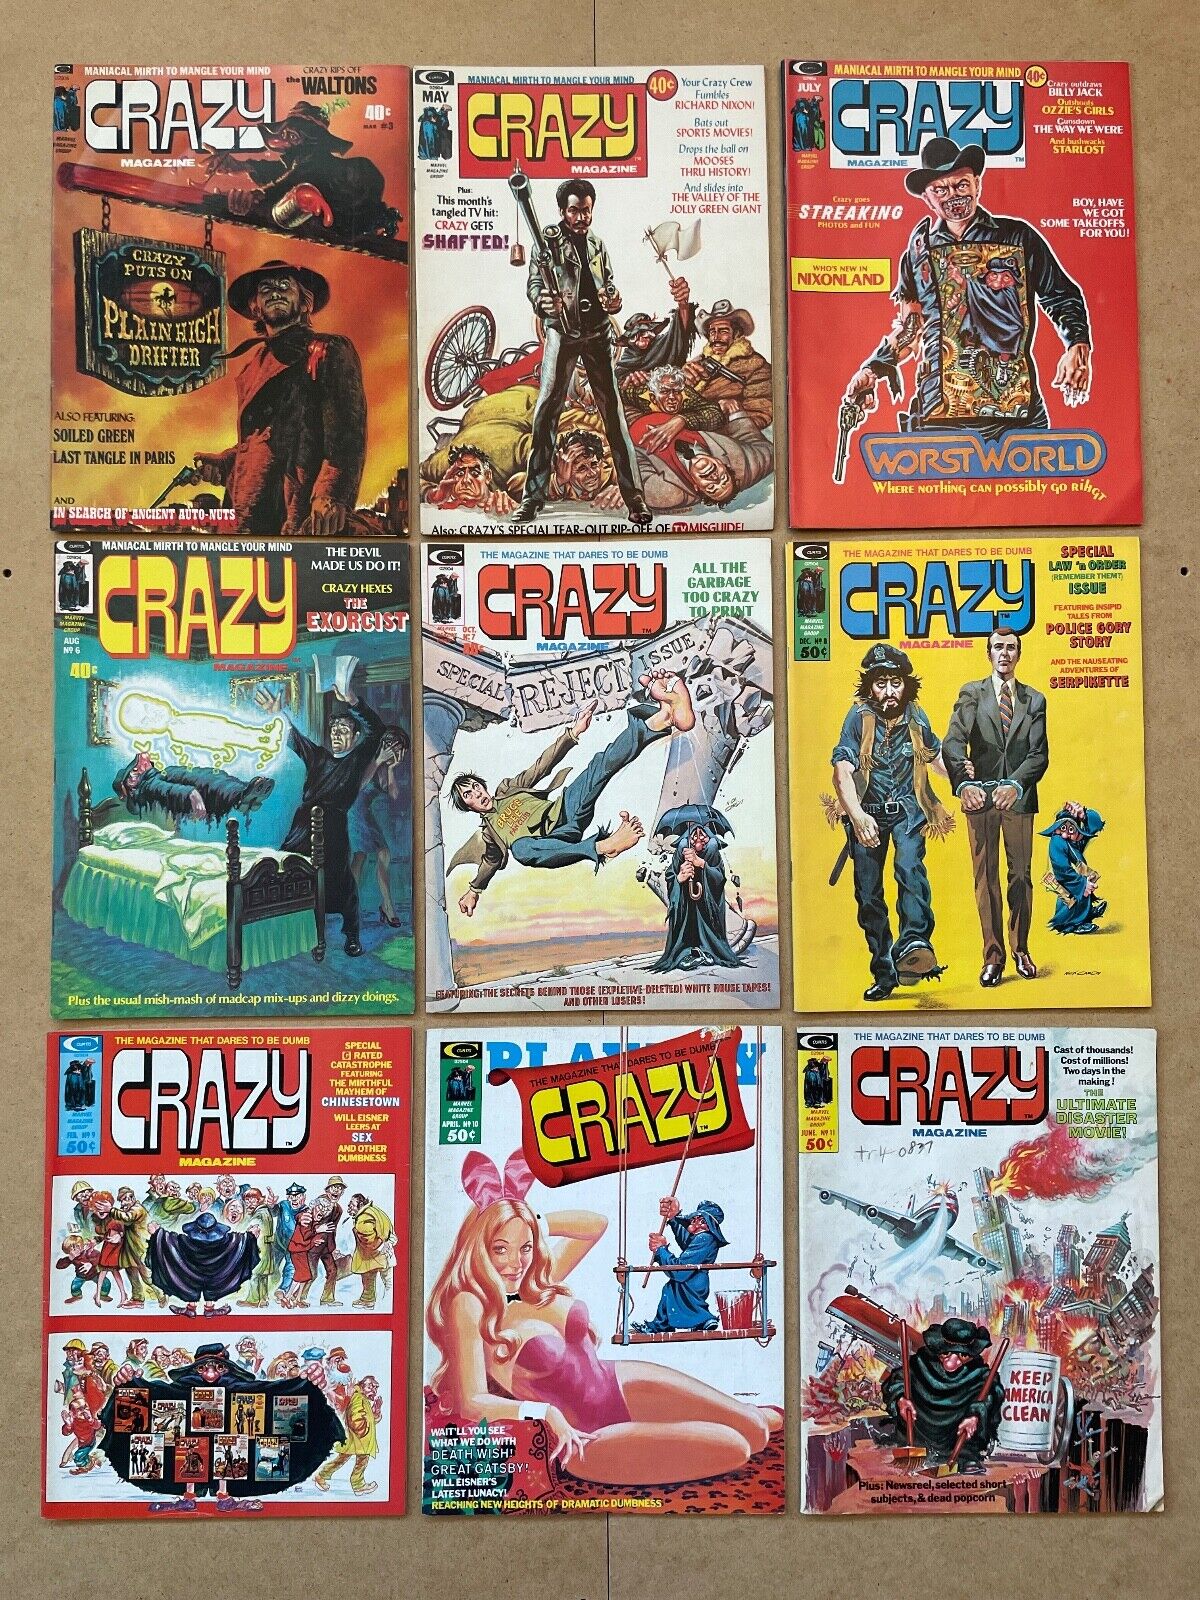 Crazy Magazine #3-11 HUGE LOT OF 9 (1973-1975)  Great value, wow